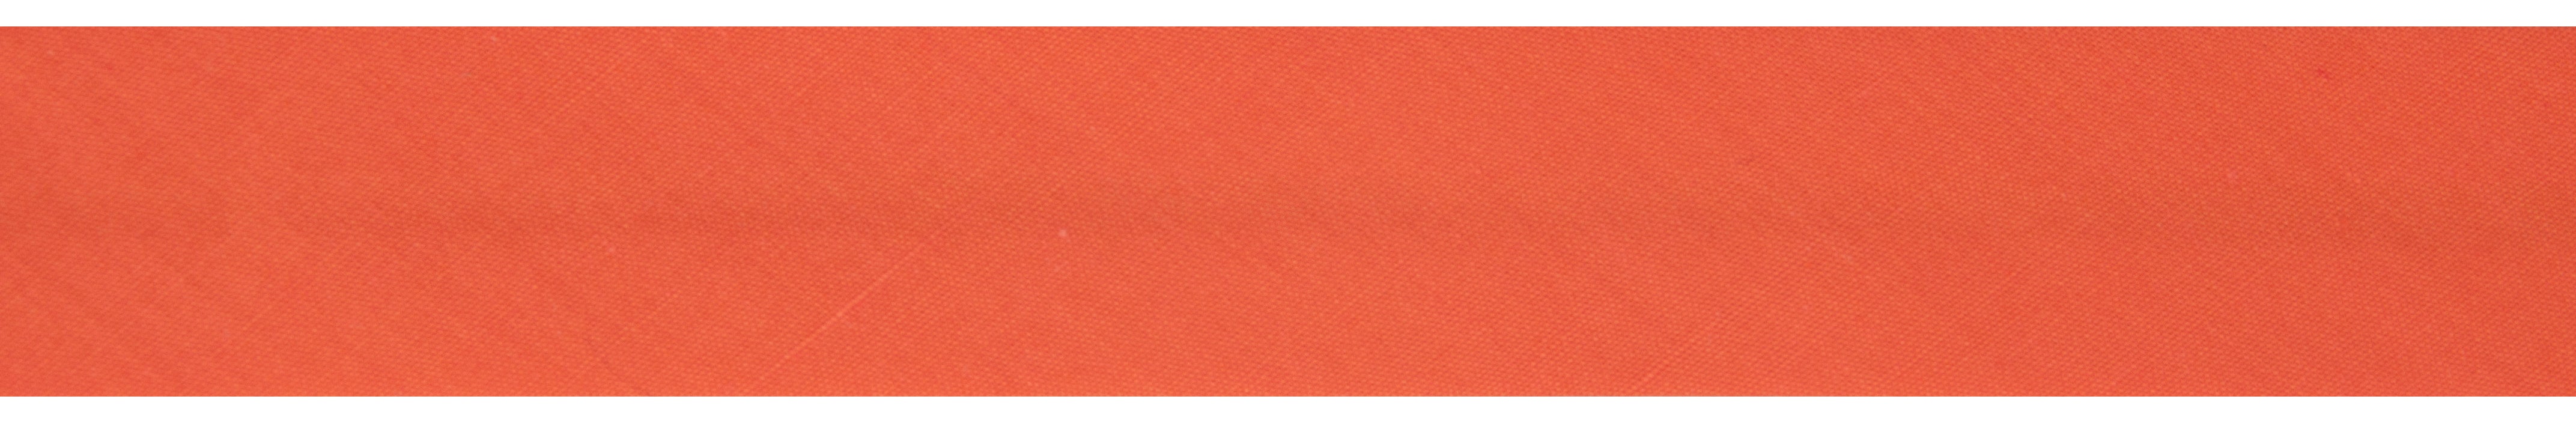 20m roll of Orange Bias Binding | 25mm width from Jaycotts Sewing Supplies